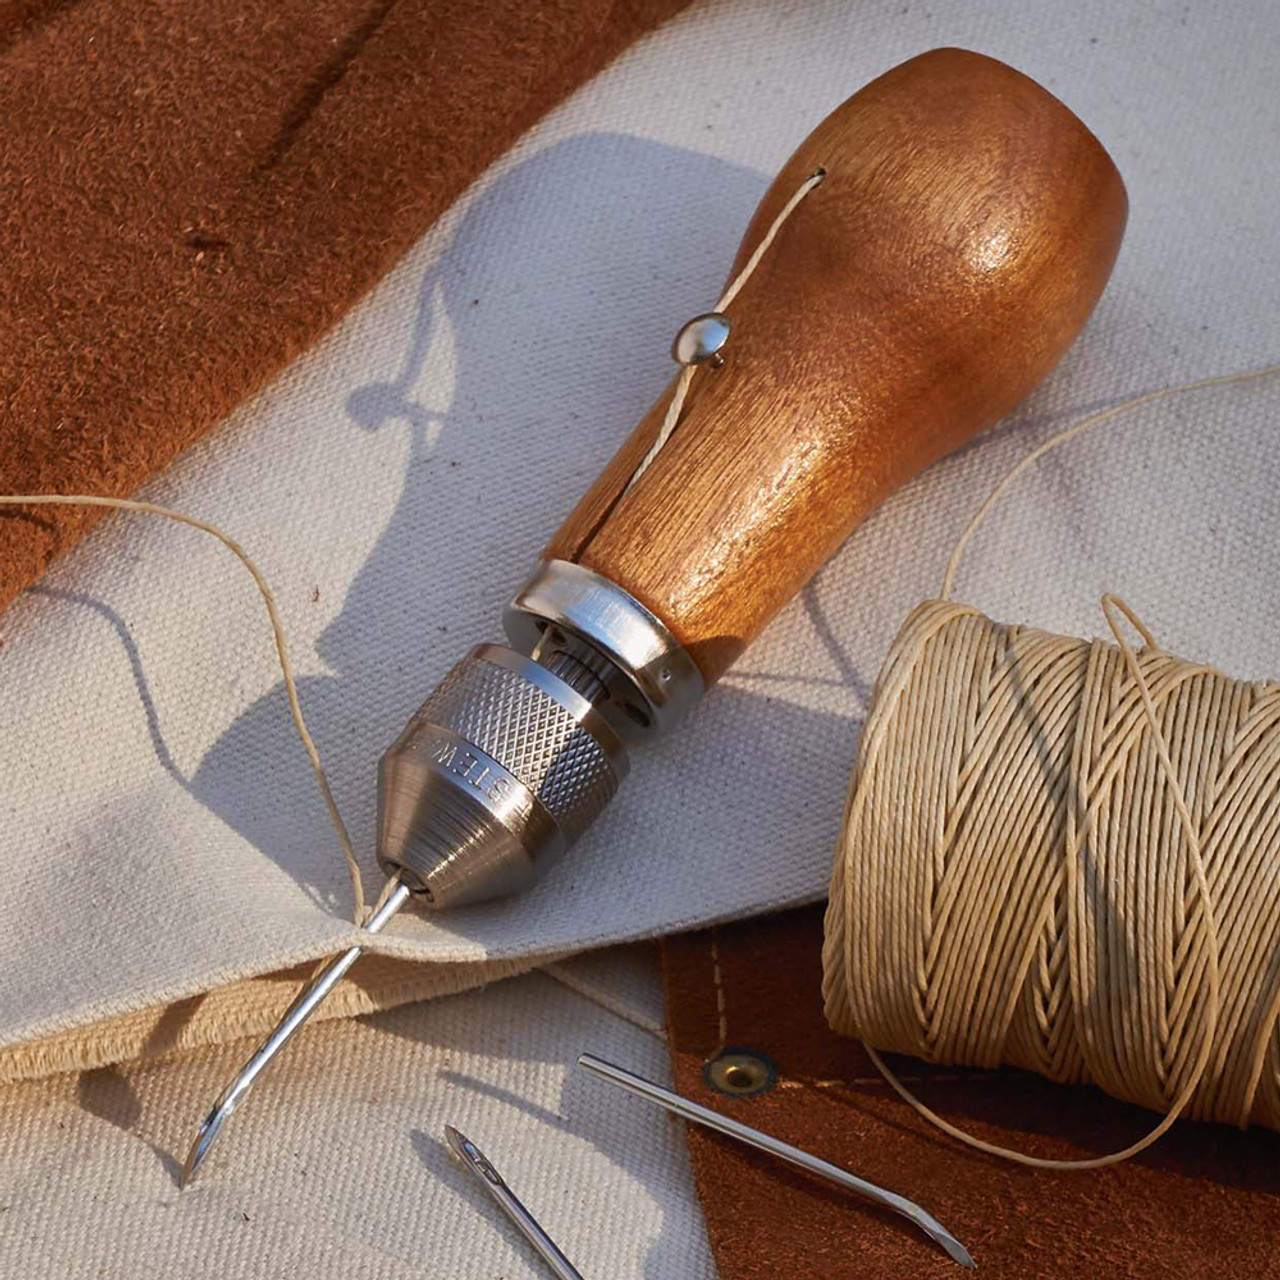 Using an Awl to Sew Leather and Heavy Fabrics